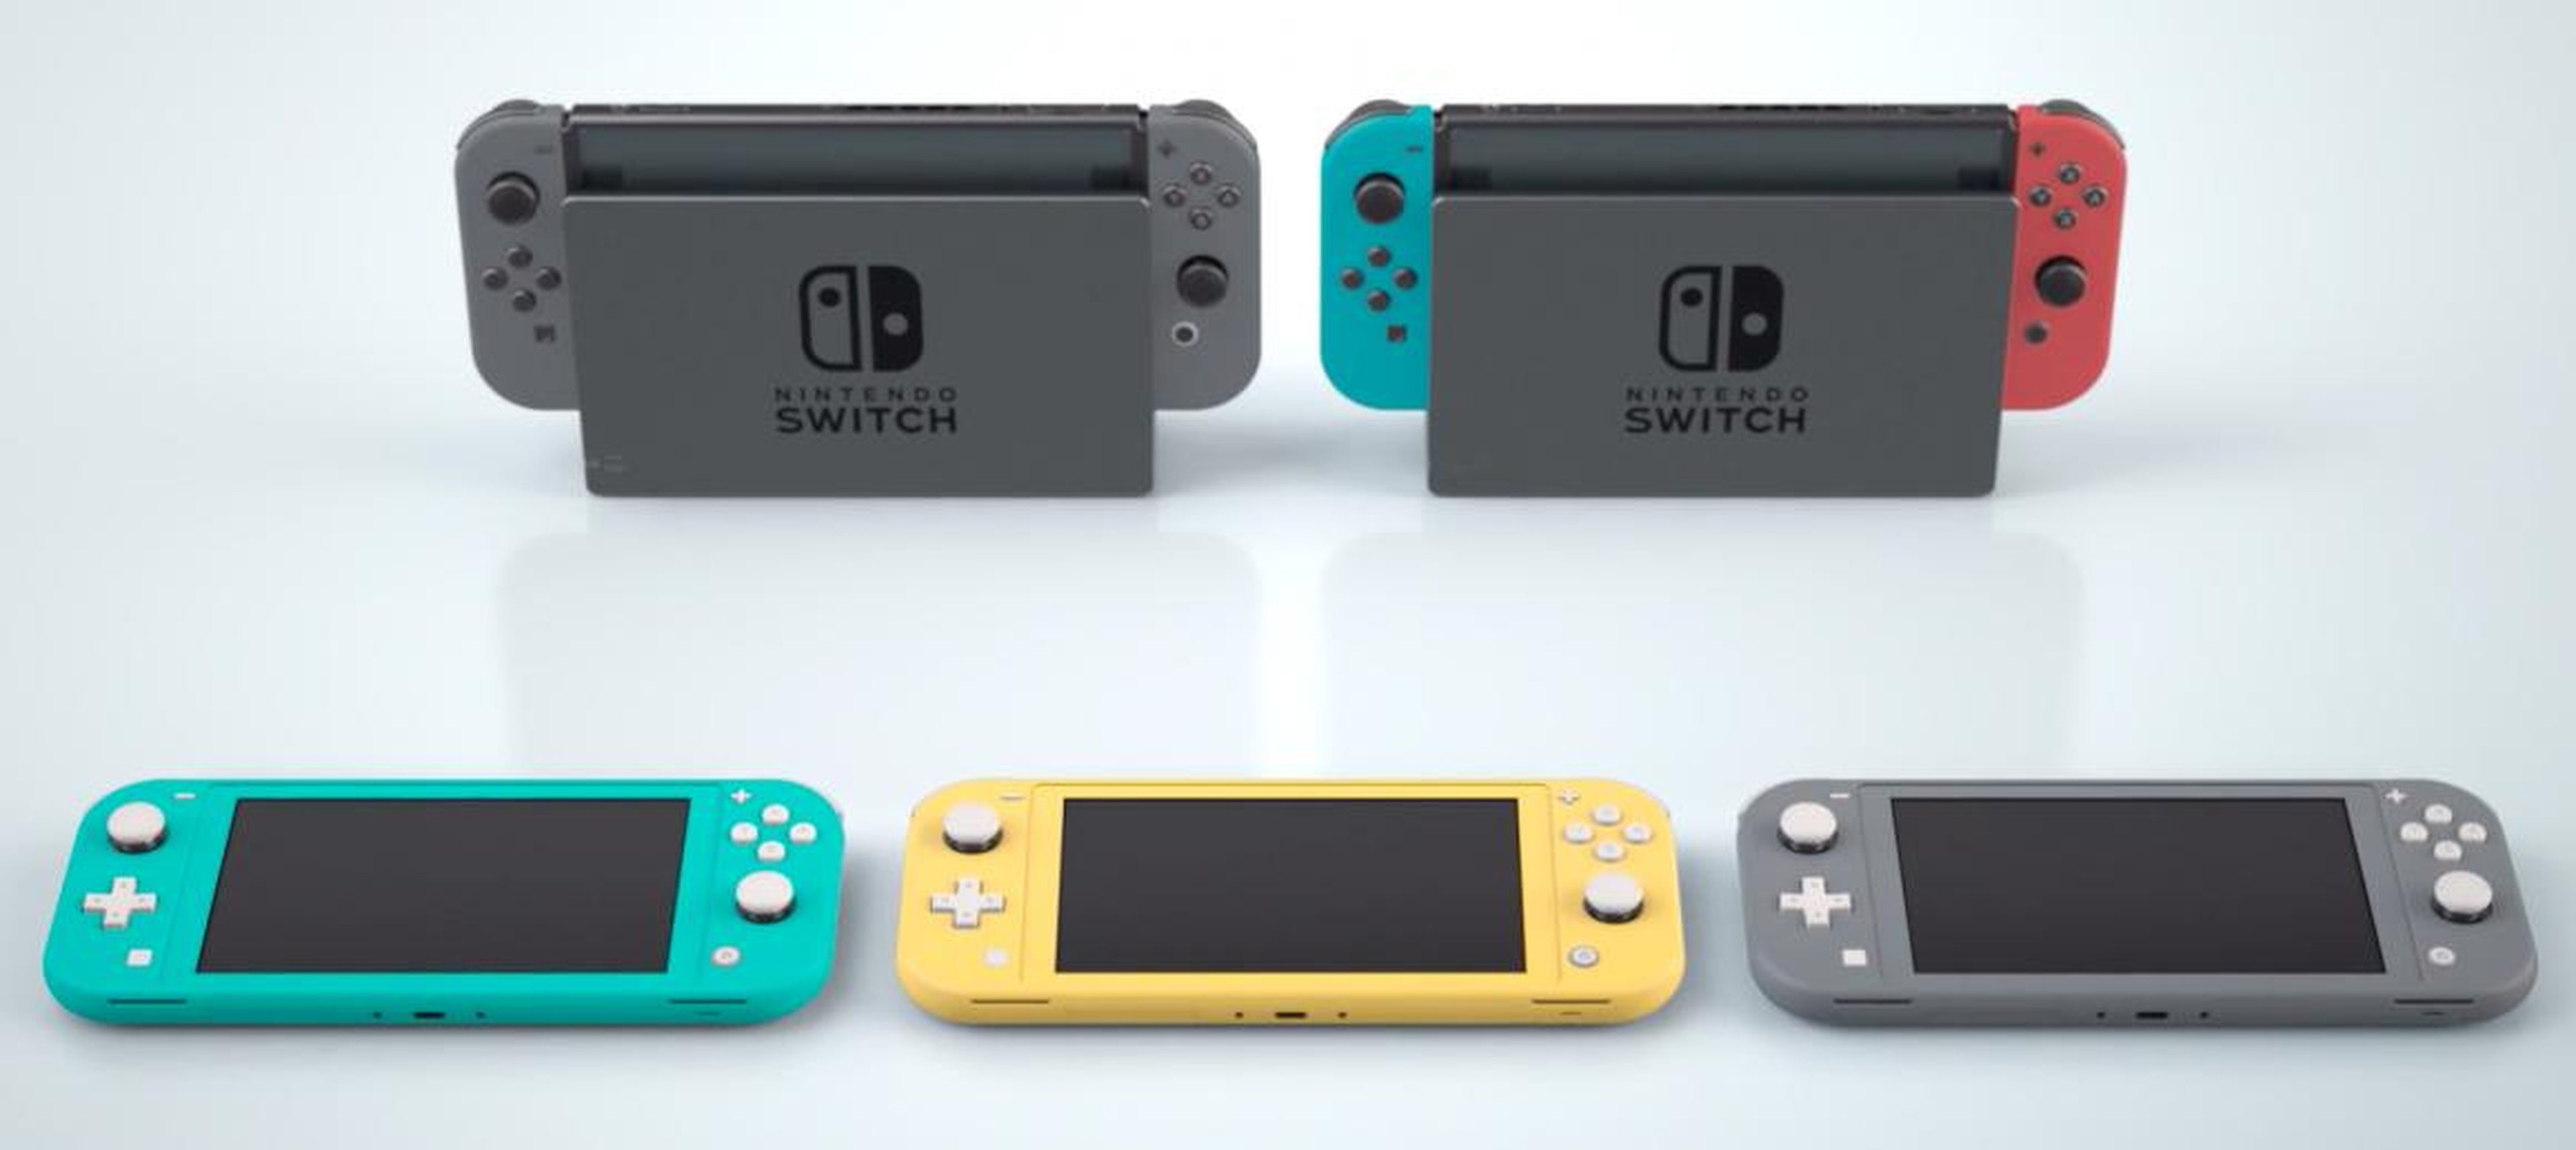 The Switch Lite offers three to seven hours of battery life, which is 30 more minutes than the original Switch released in March 2017. But the full Switch consoles released in August or later now have a battery of 4.5 to nine